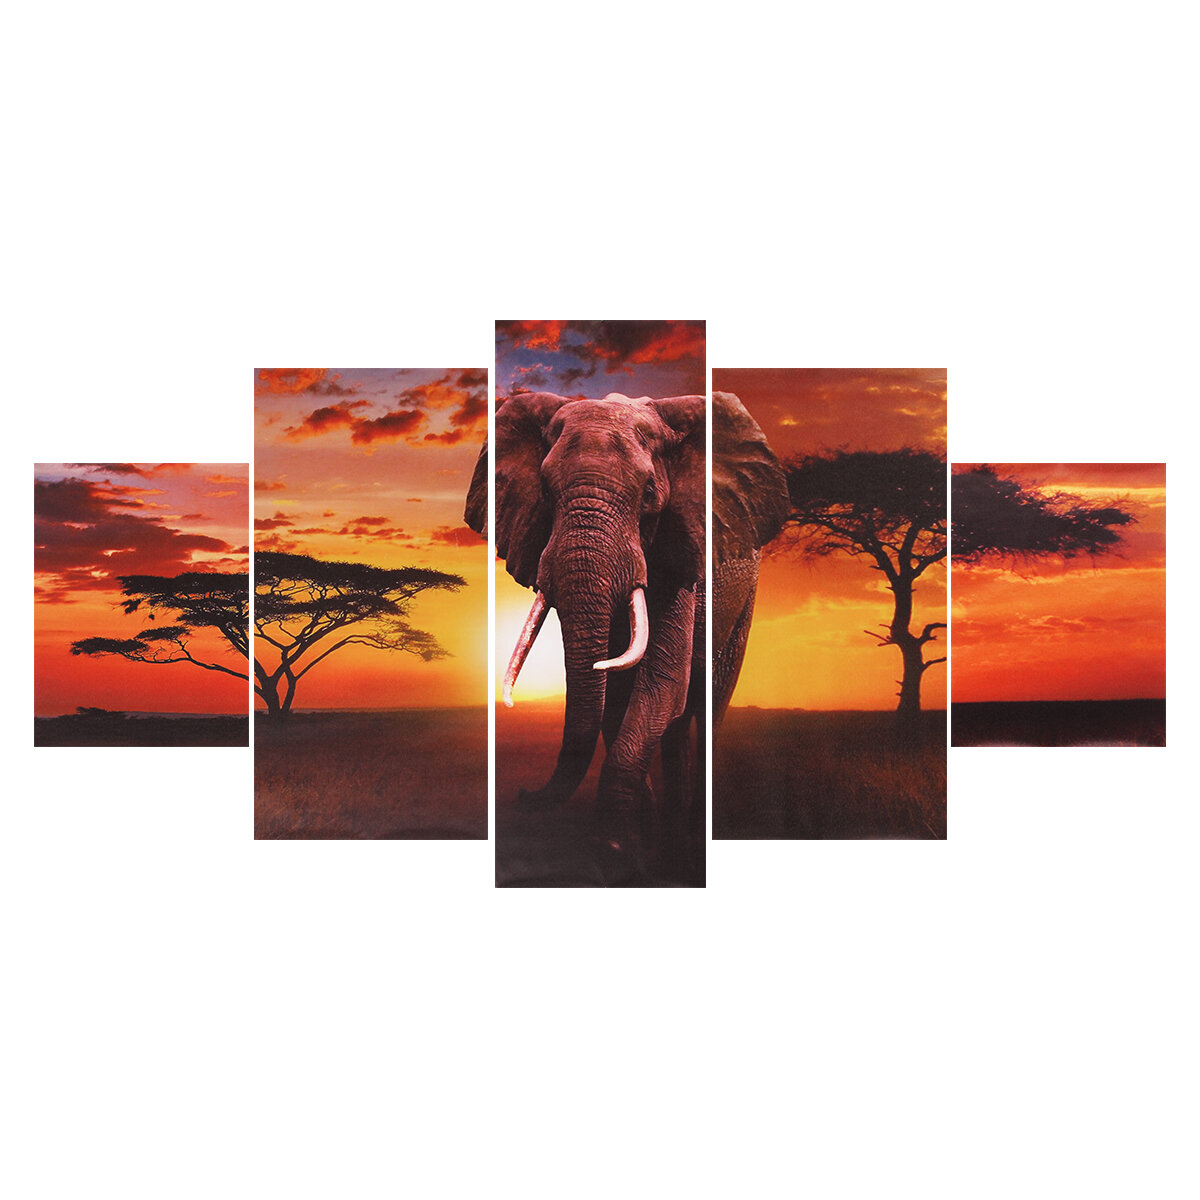 

5Pcs Elephant Wall Decorative Paintings Canvas Print Art Pictures Frameless Wall Hanging Decor for Home Office